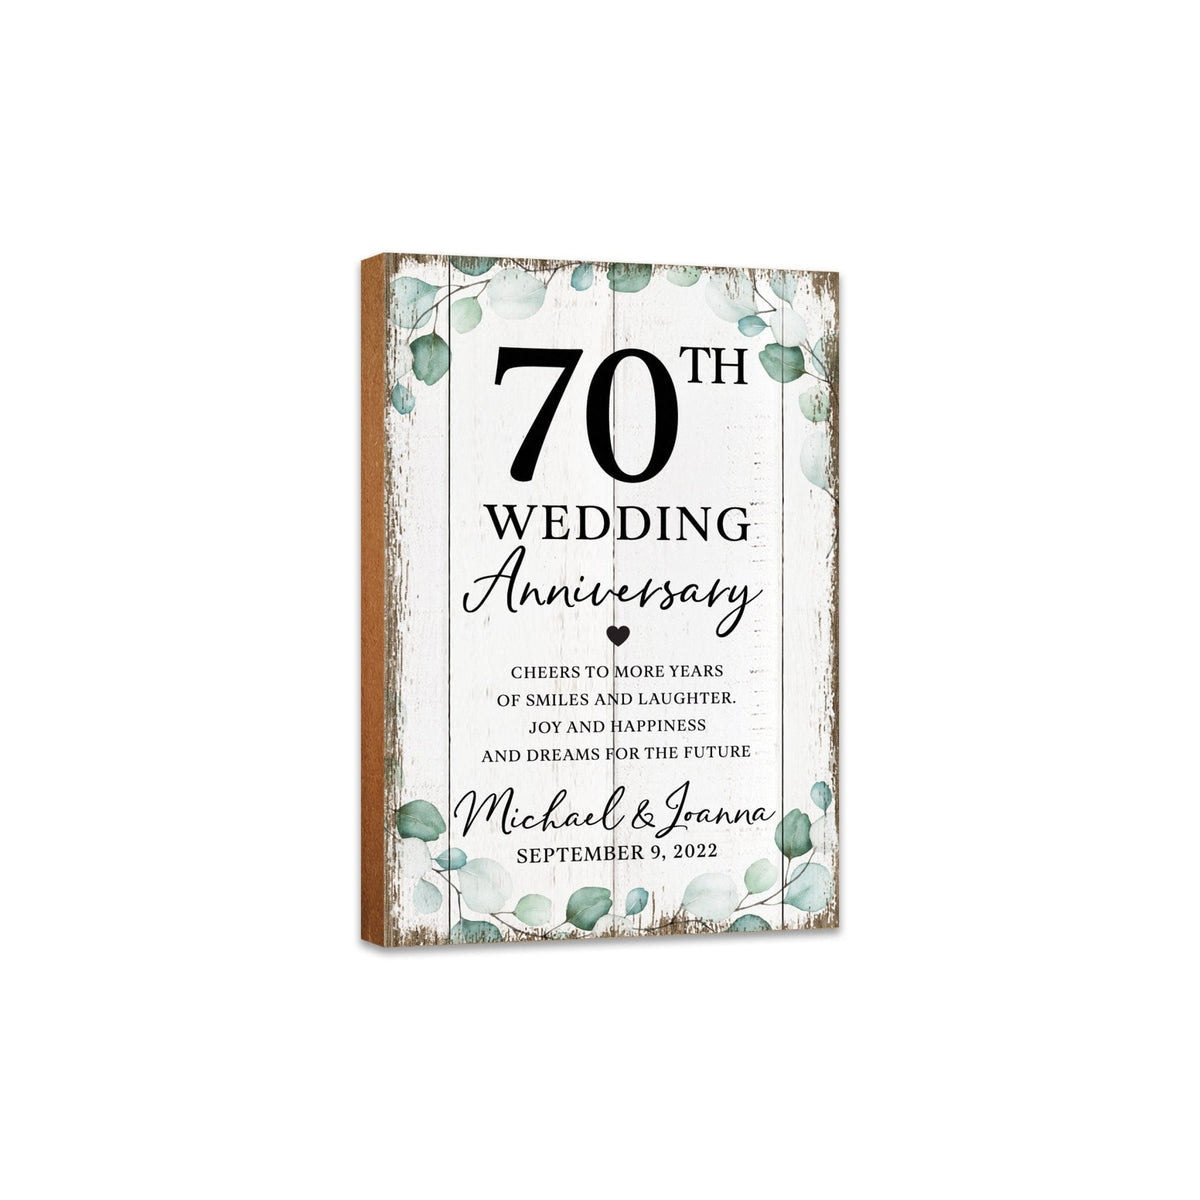 Personalized 70th Wedding Anniversary Unique Shelf Décor and Tabletop Signs - Cheers To More Years - LifeSong Milestones